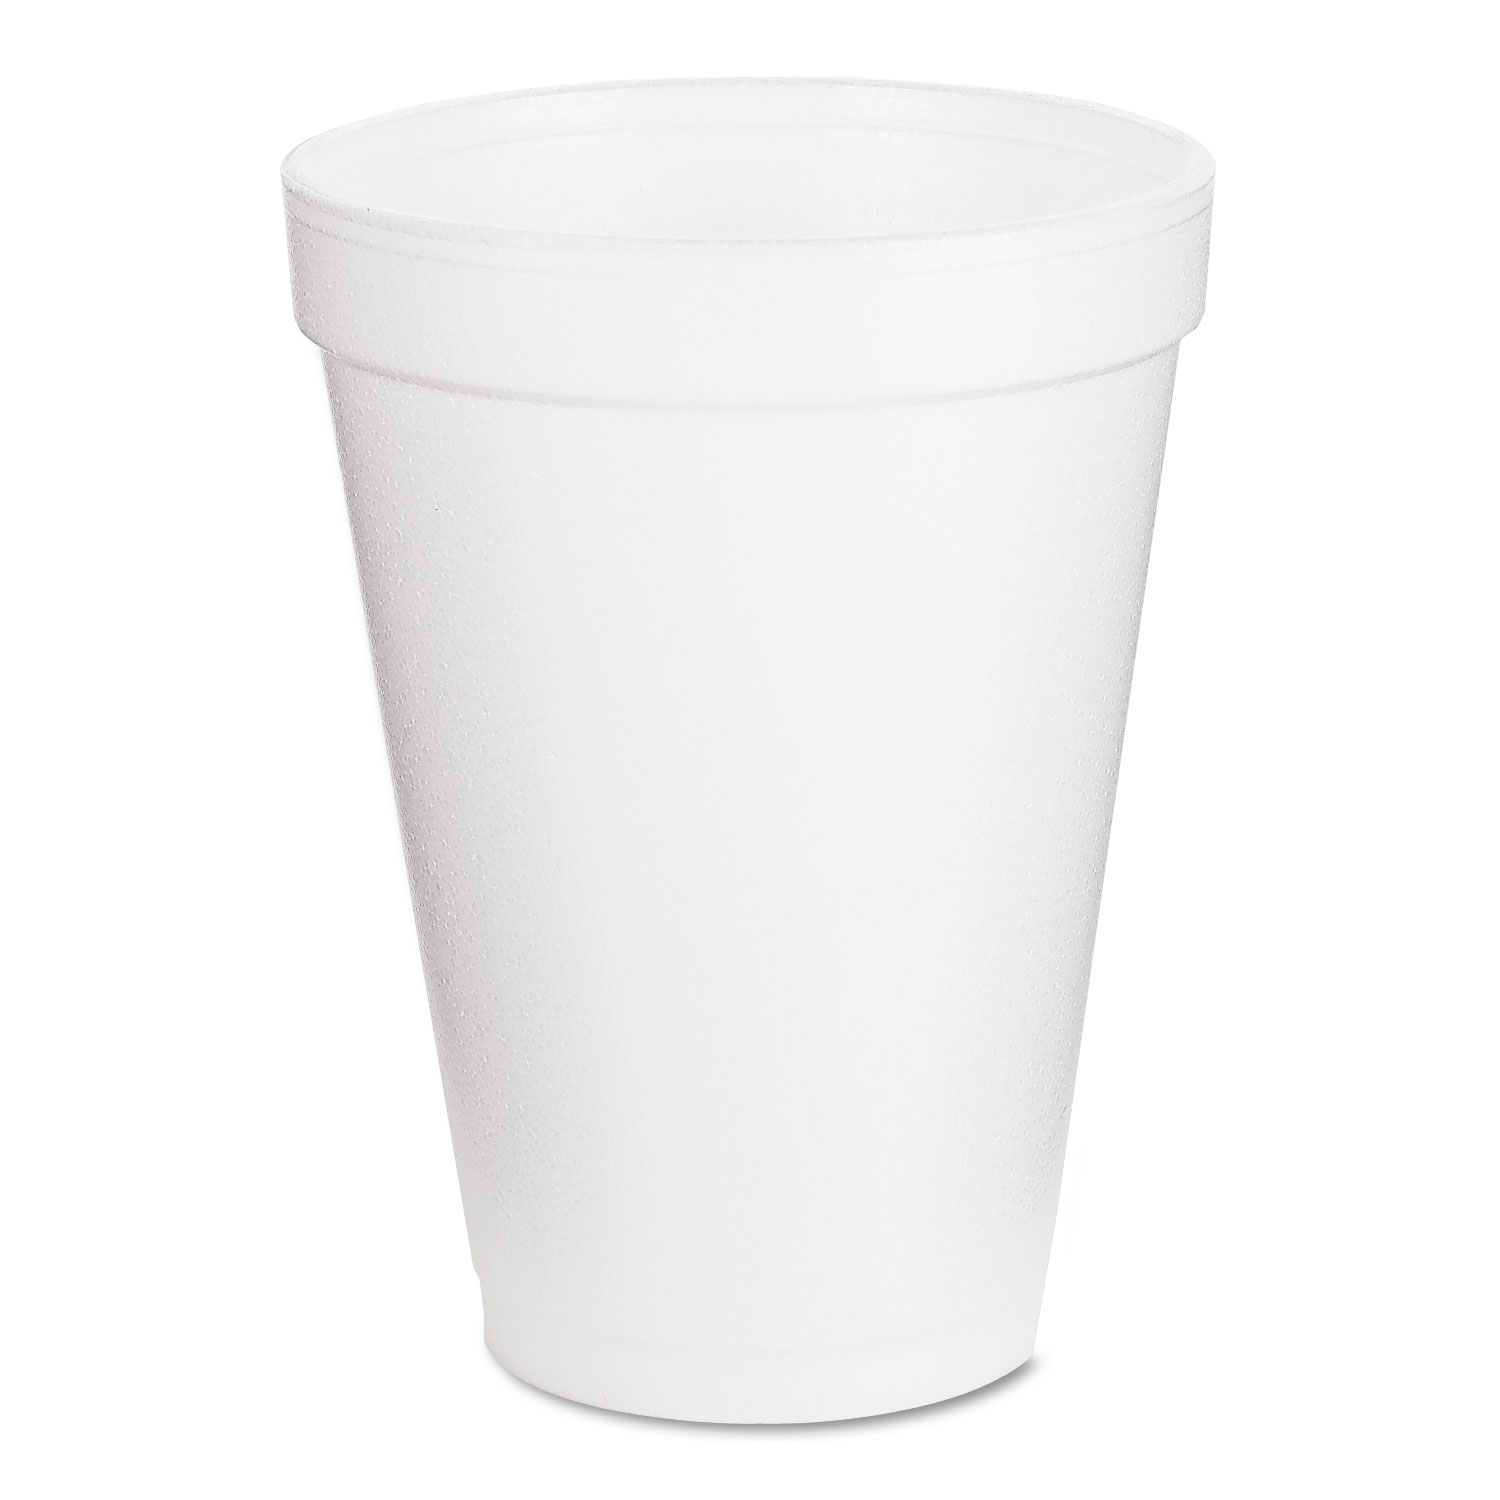 Plastic Lids for Foam Cups, Bowls and Containers, Flat with Straw